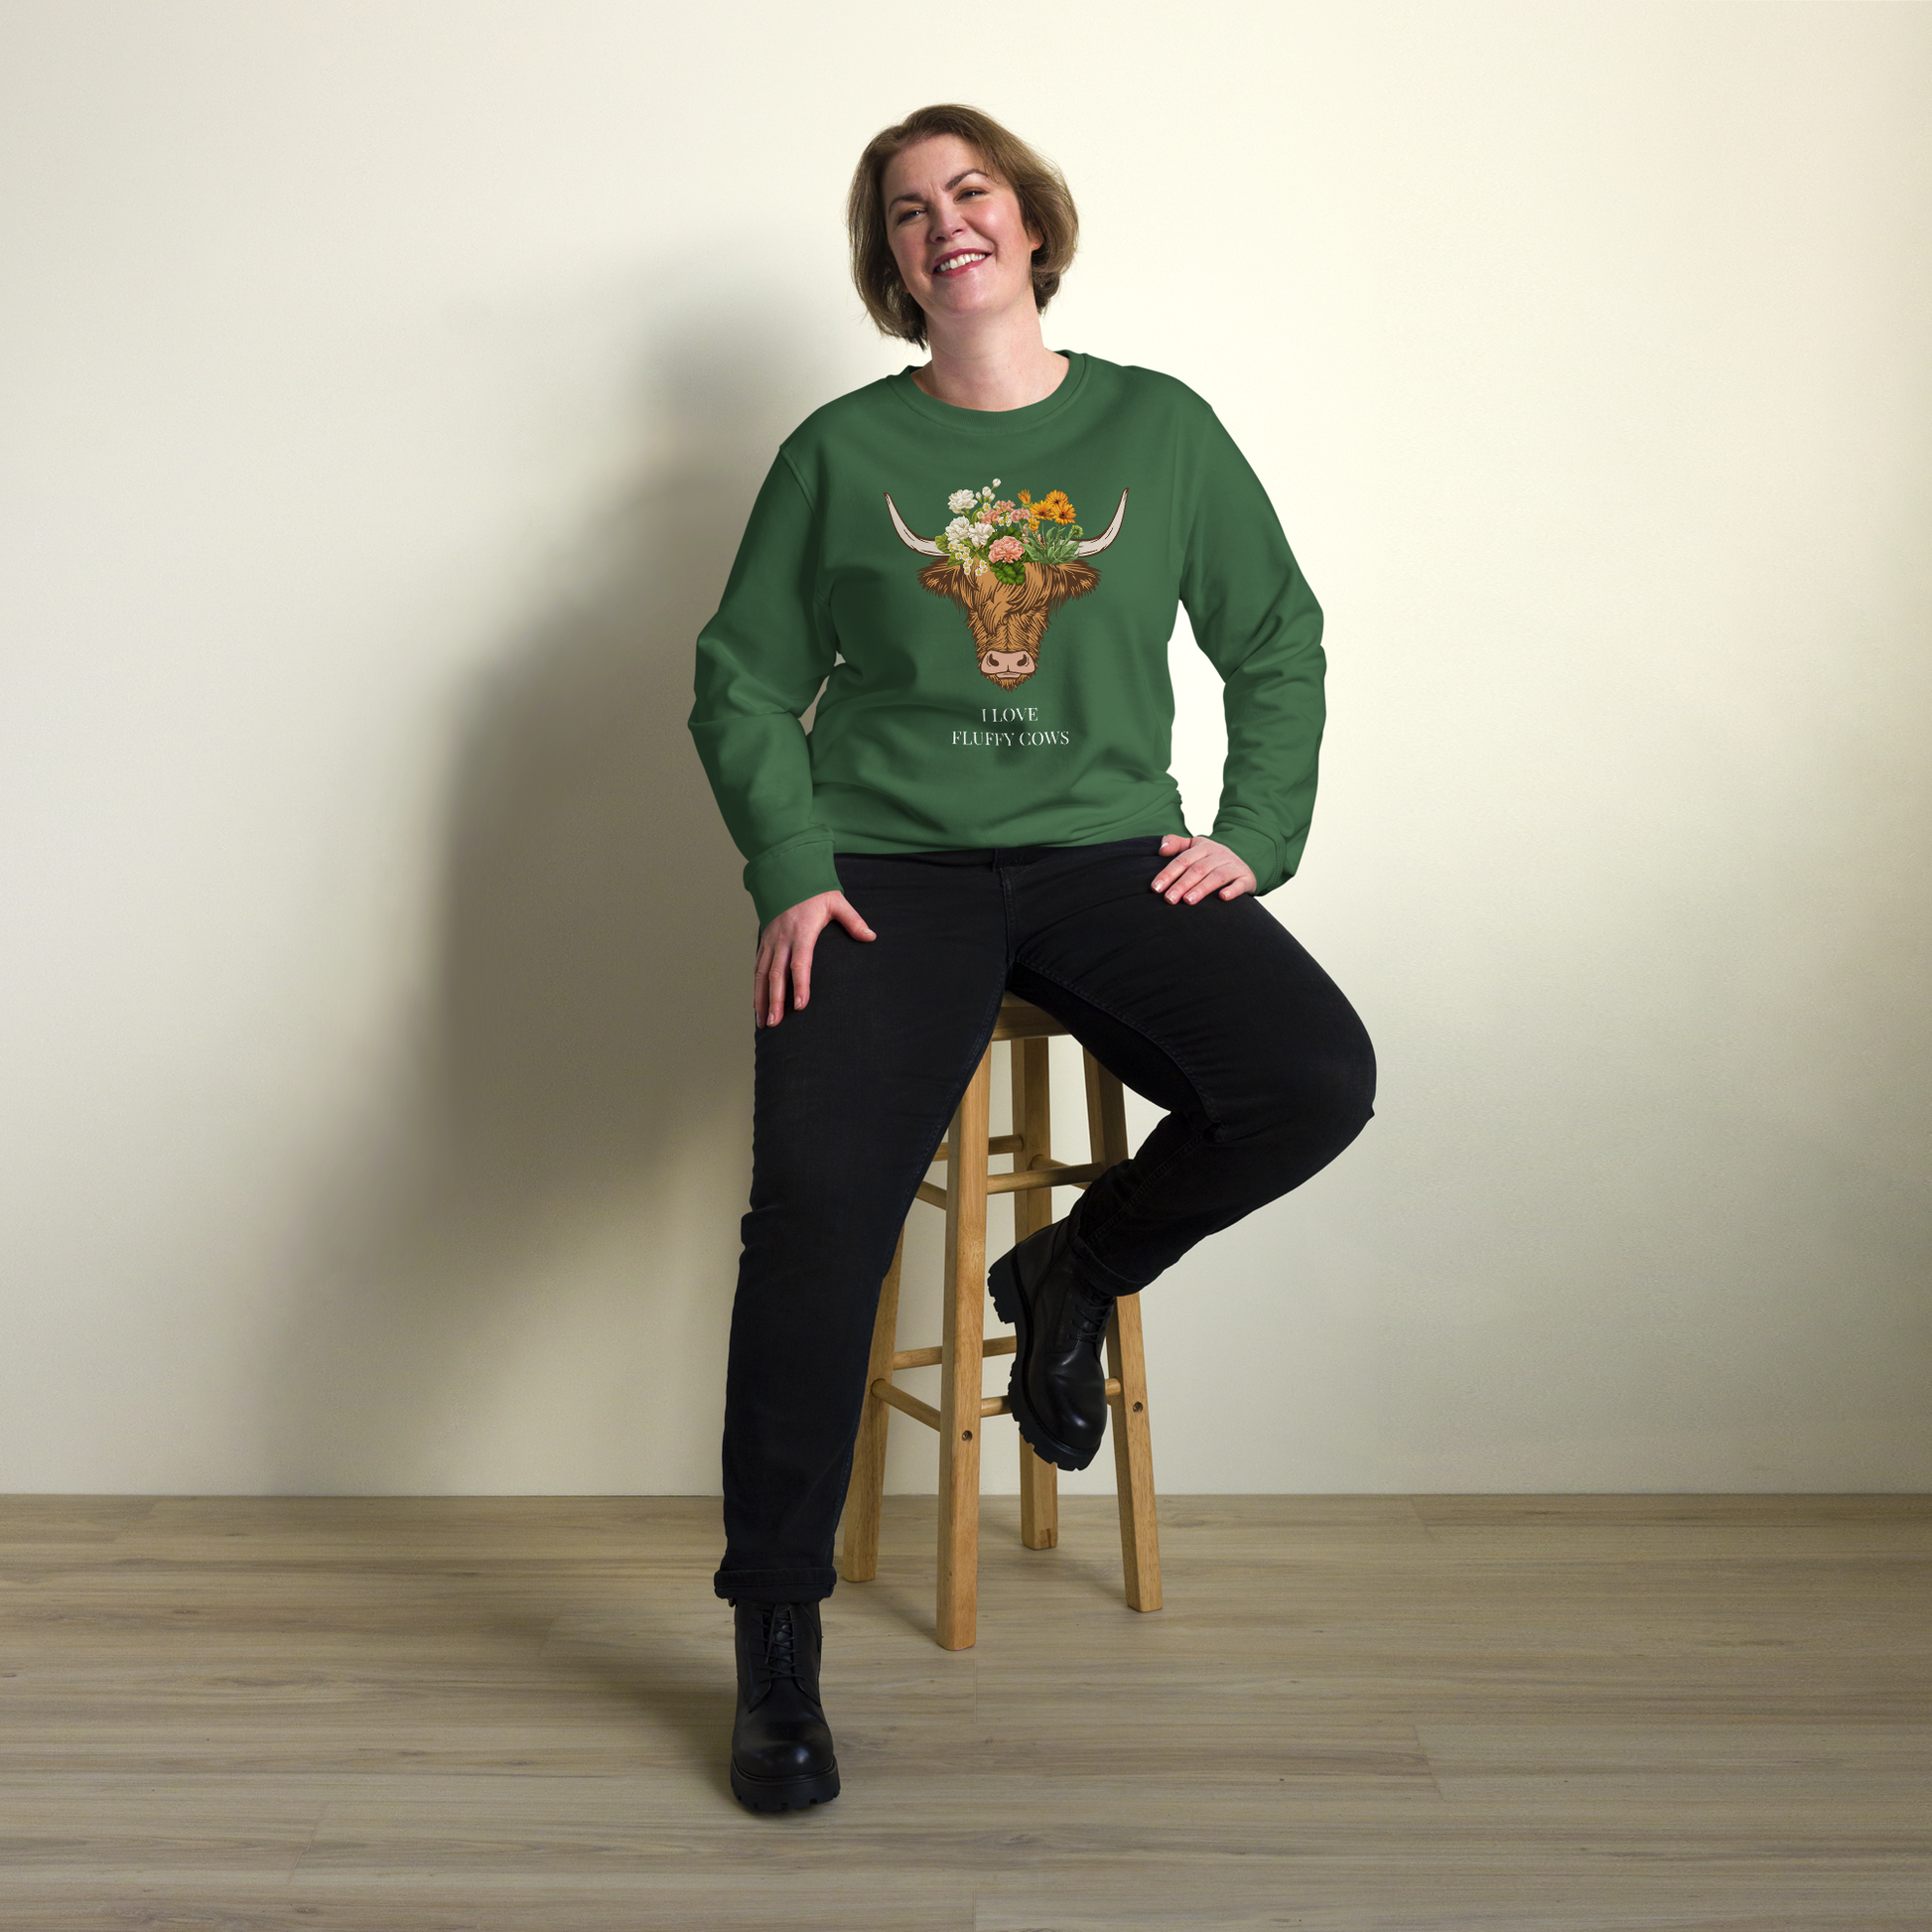 Smiling woman wearing a Bottle Green Organic Cotton Highland Cow Sweatshirt featuring an adorable I Love Fluffy Cows graphic on the chest - Cute Graphic Highland Cow Sweatshirts - Boozy Fox